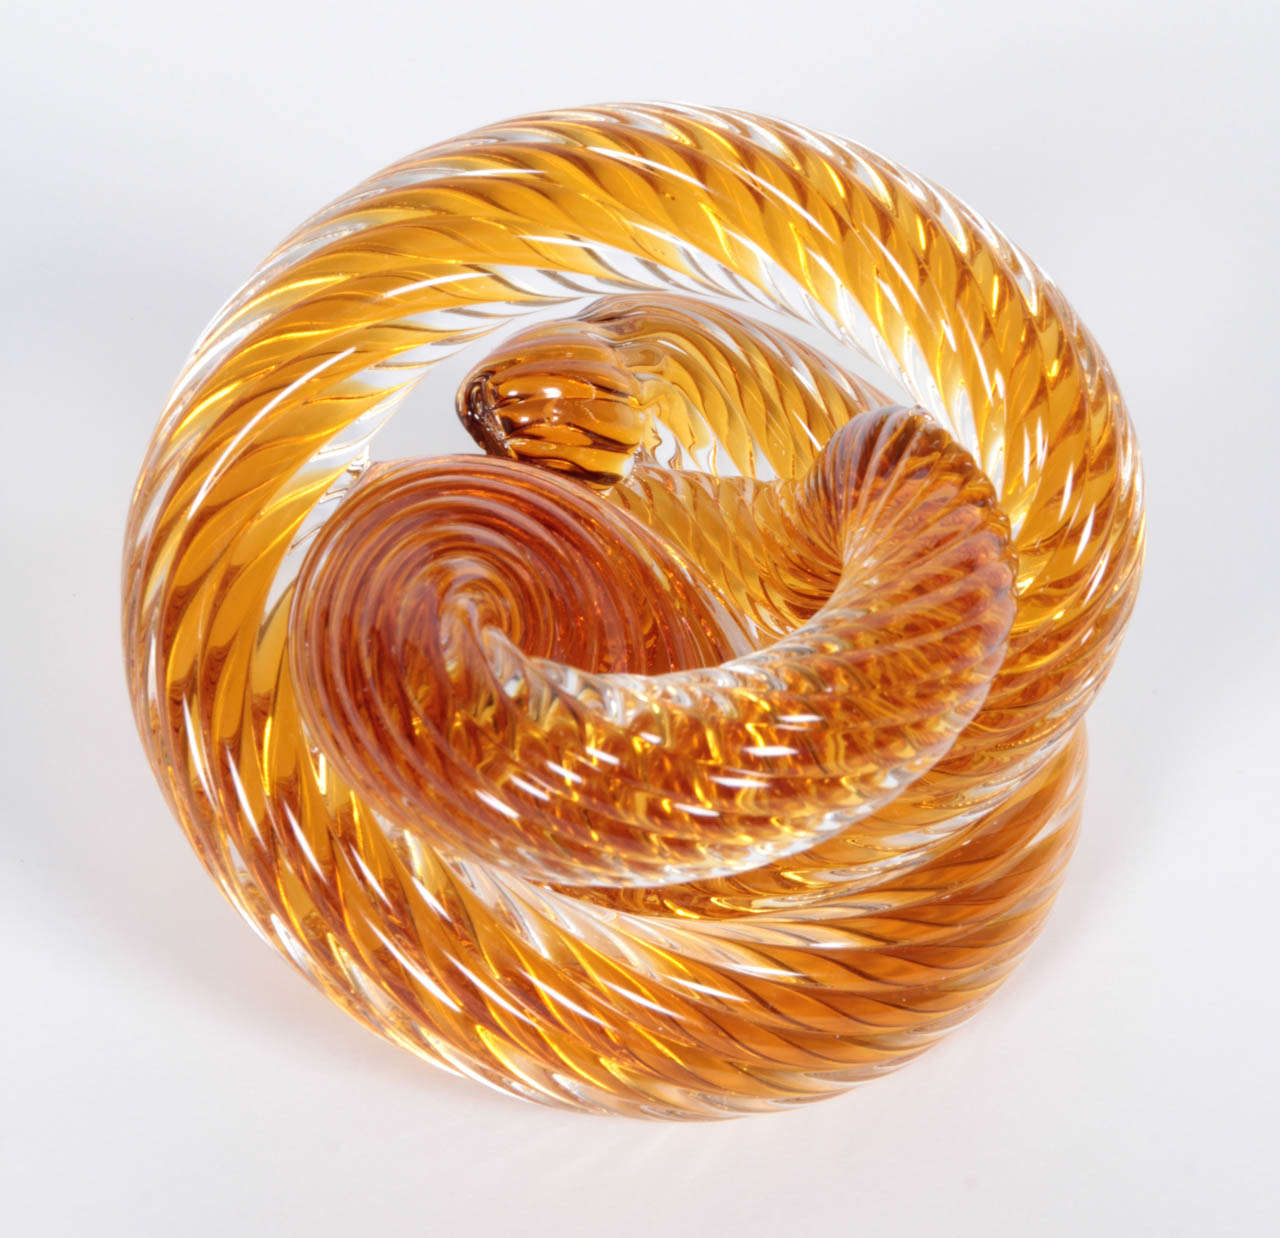 Tangerine-colored Murano glass coiled paperweight or small tabletop sculpture, Italy, circa 1970.